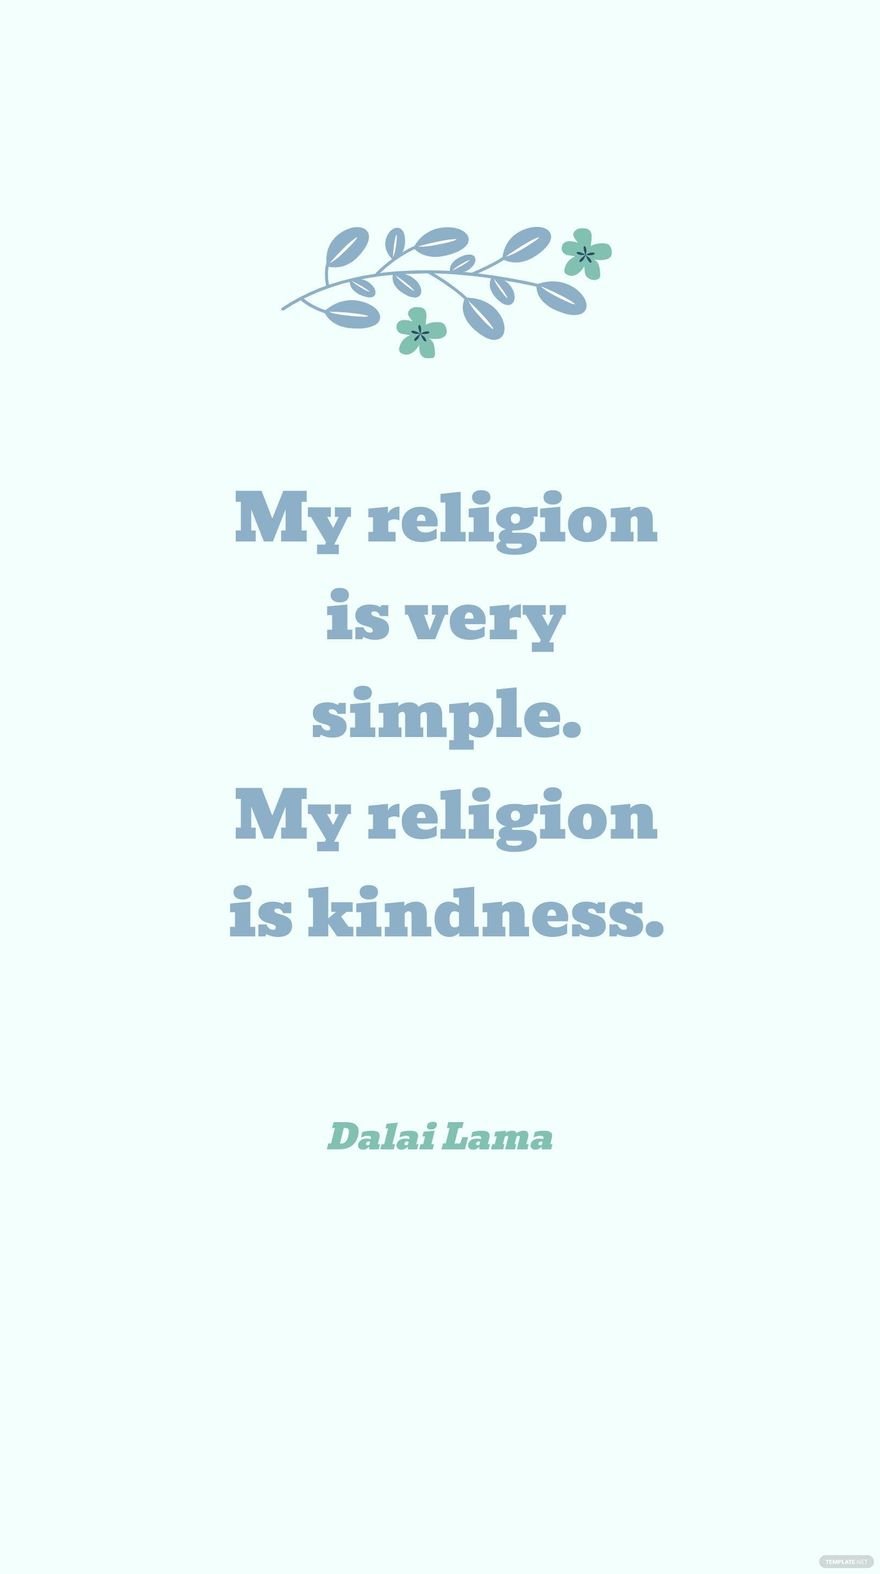 Free Dalai Lama - My religion is very simple. My religion is kindness. in JPG